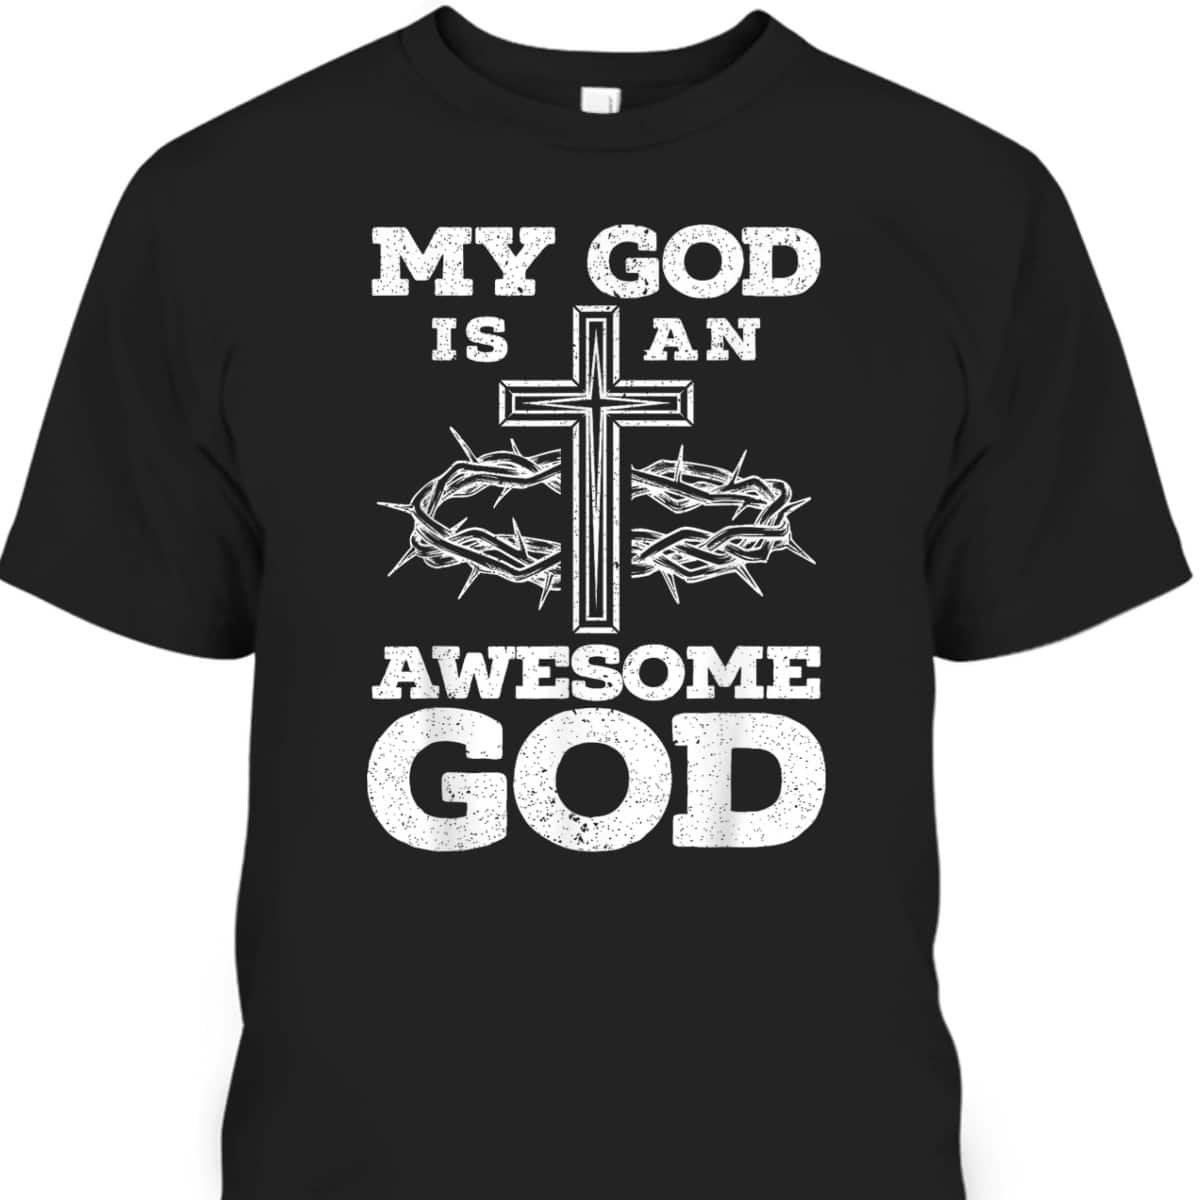 My God Is An Awesome God Christian Religious Jesus Christ T-Shirt